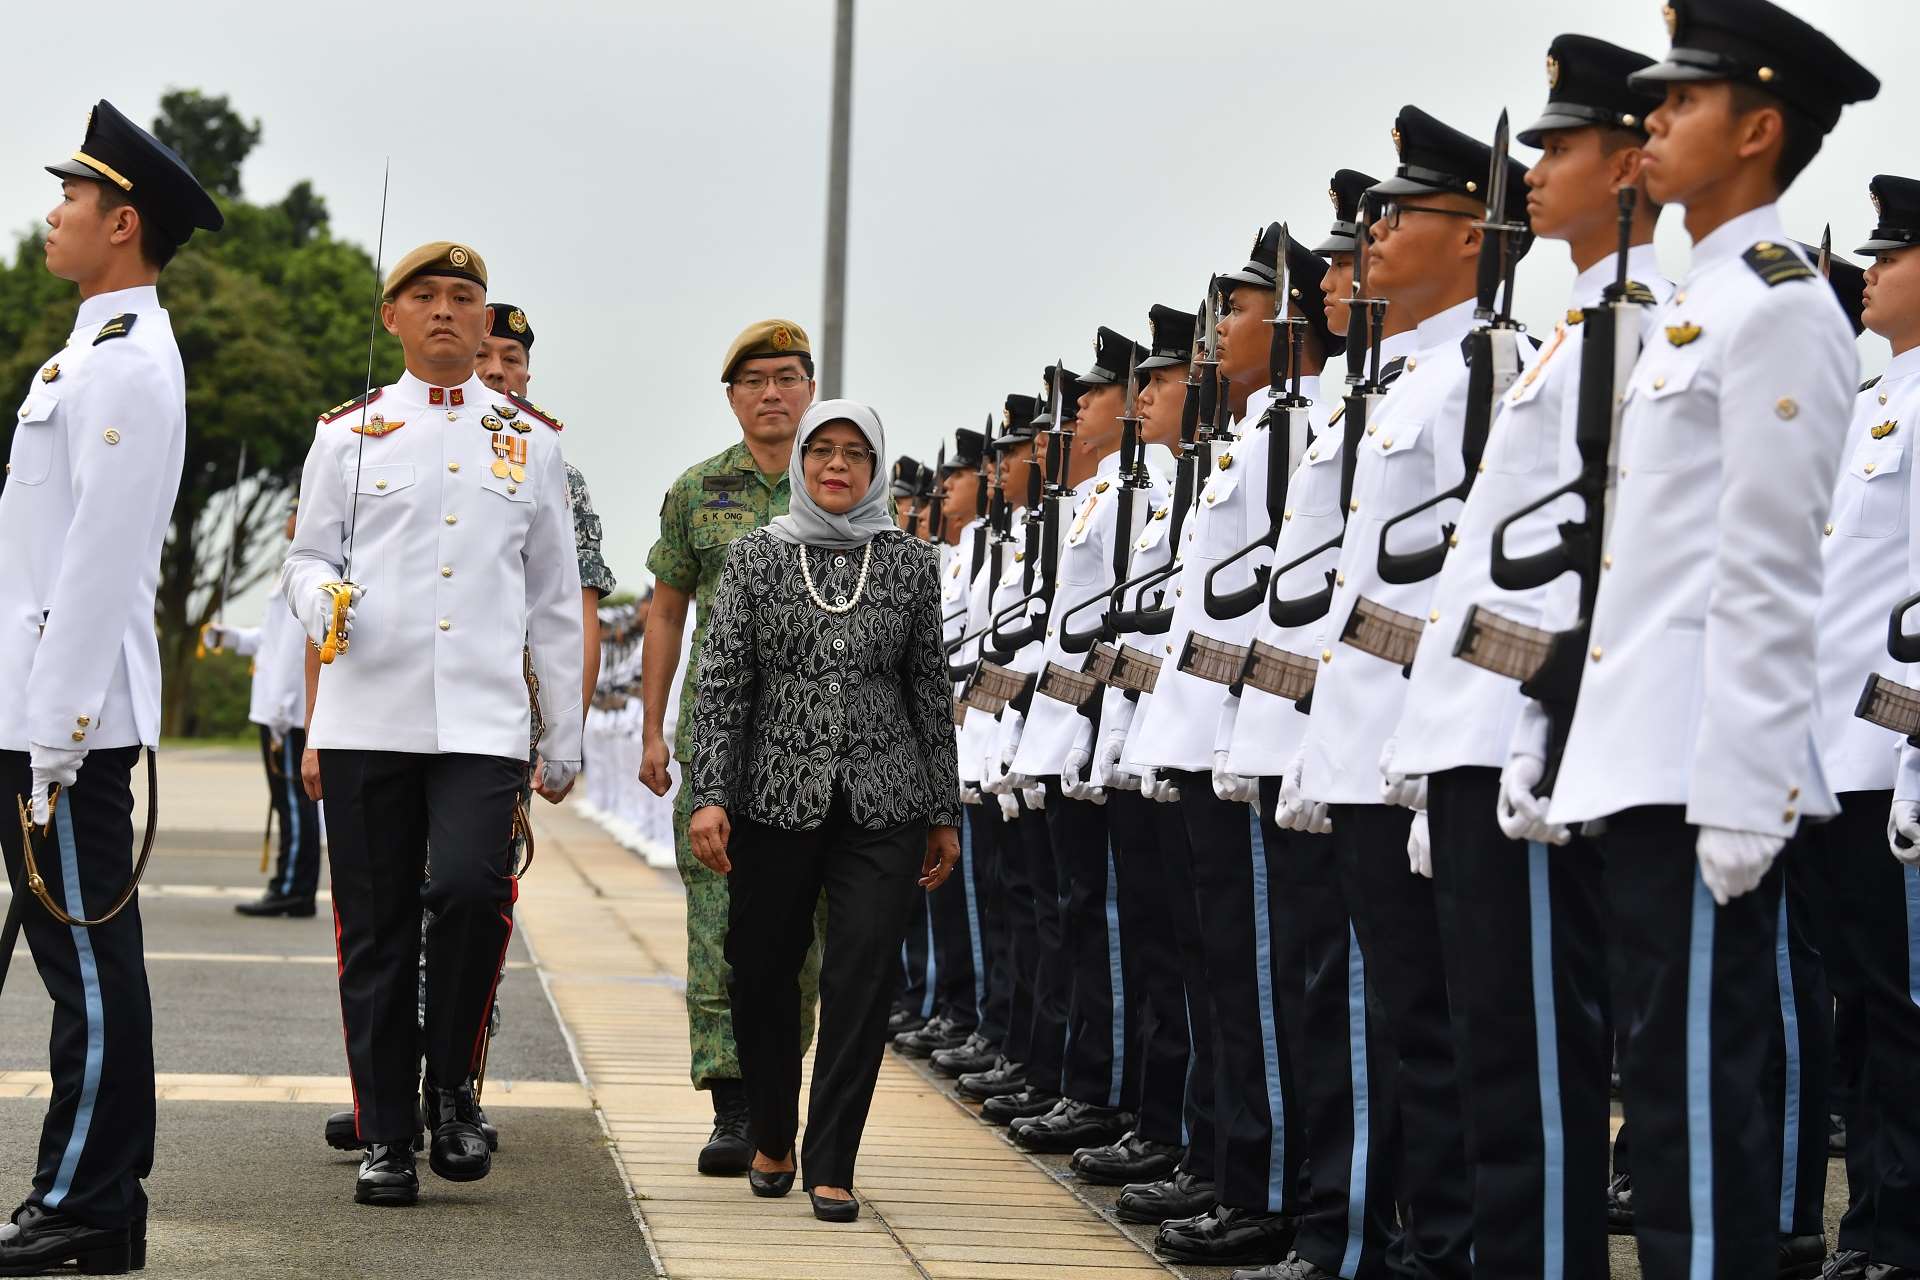 President Halimah Yacob inspecting the Guard of Honour contingents at the Singapore Armed Forces (SAF) Day Parade held at SAFTI Military Institute.